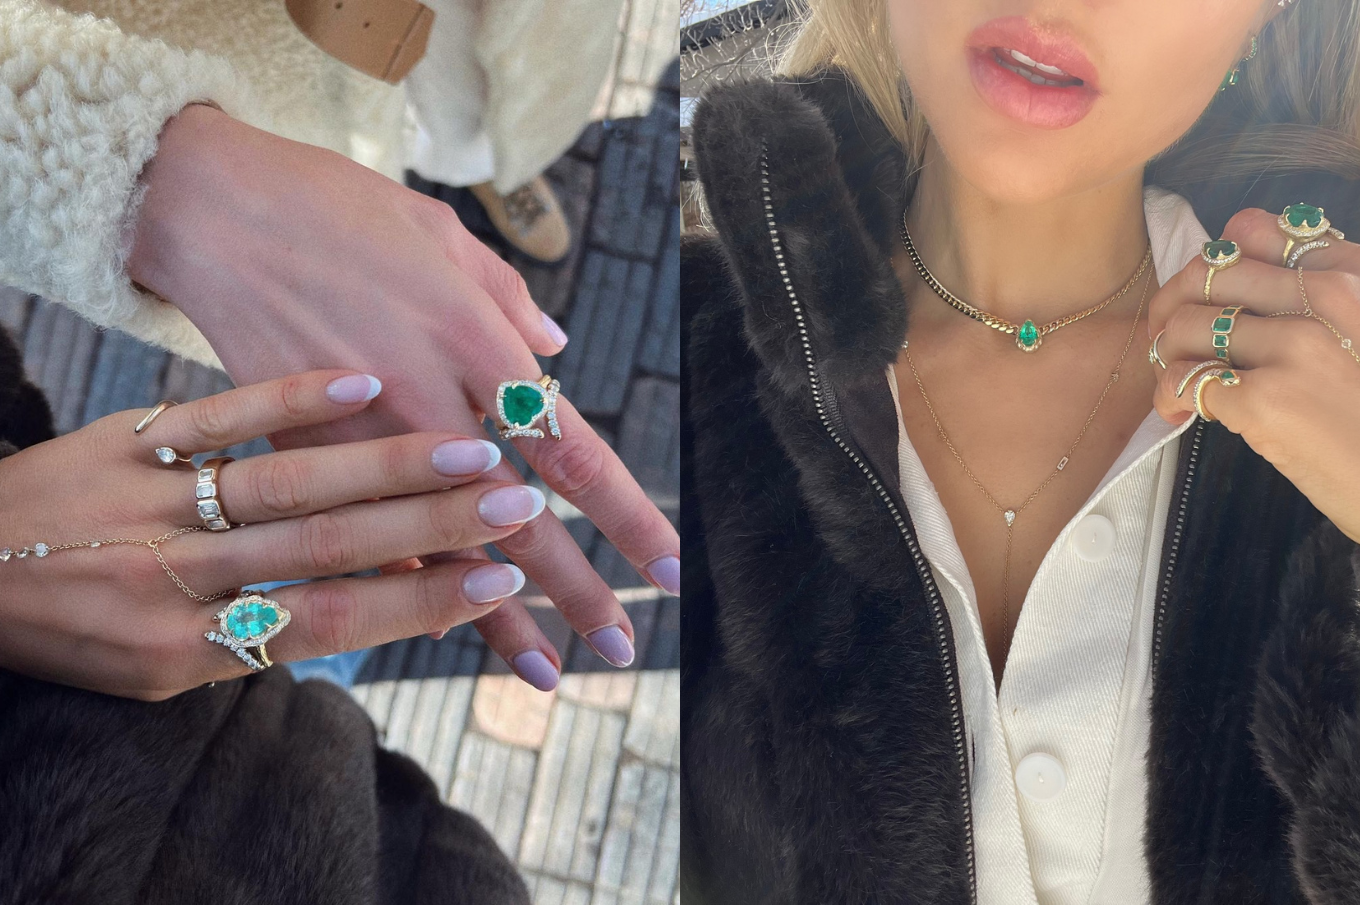 Left Image: Two hands together with LH rings on, Right Image: Selfie of Logan with Emerald Necklace and Rings on